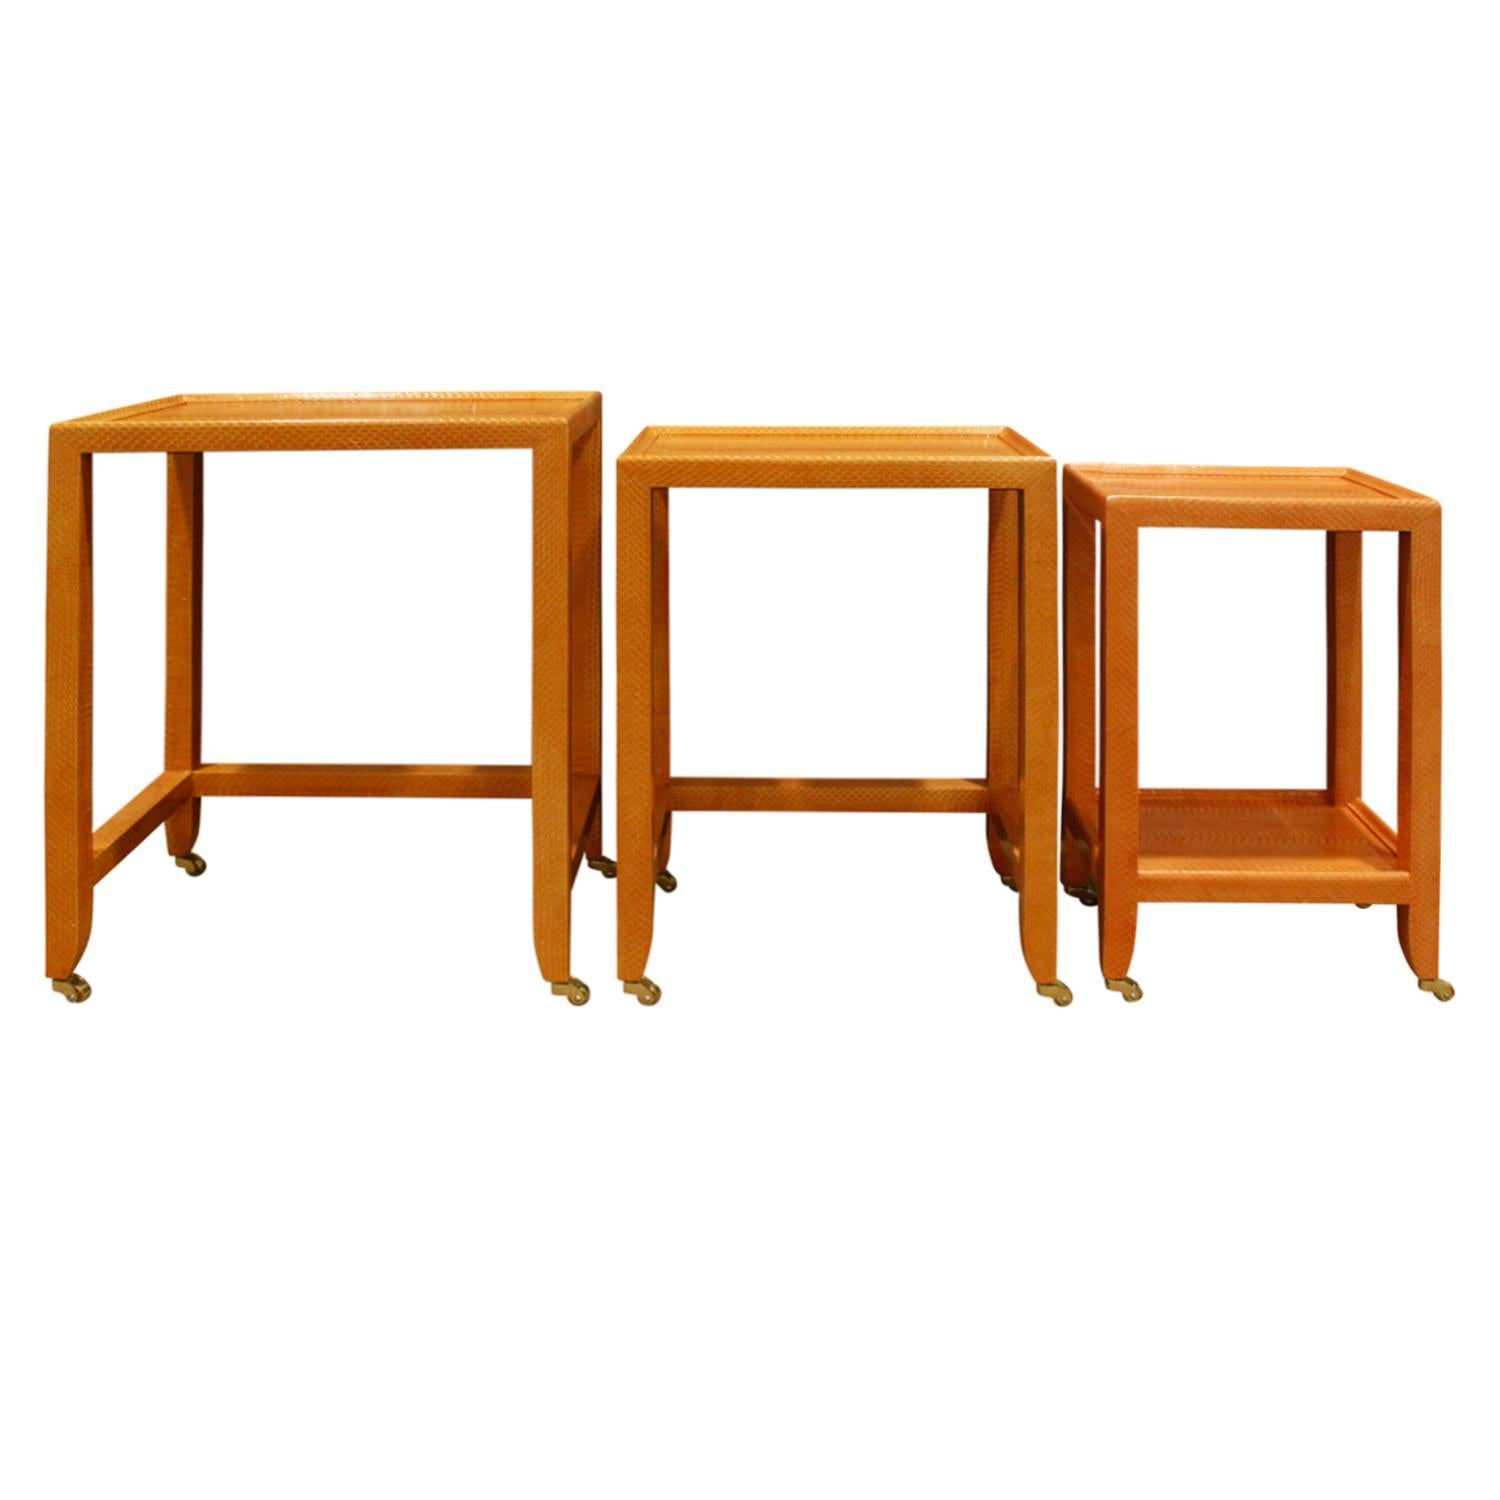 Modern Mary Forssberg Nesting Telephone Tables in Apricot Python 2019 'Signed'